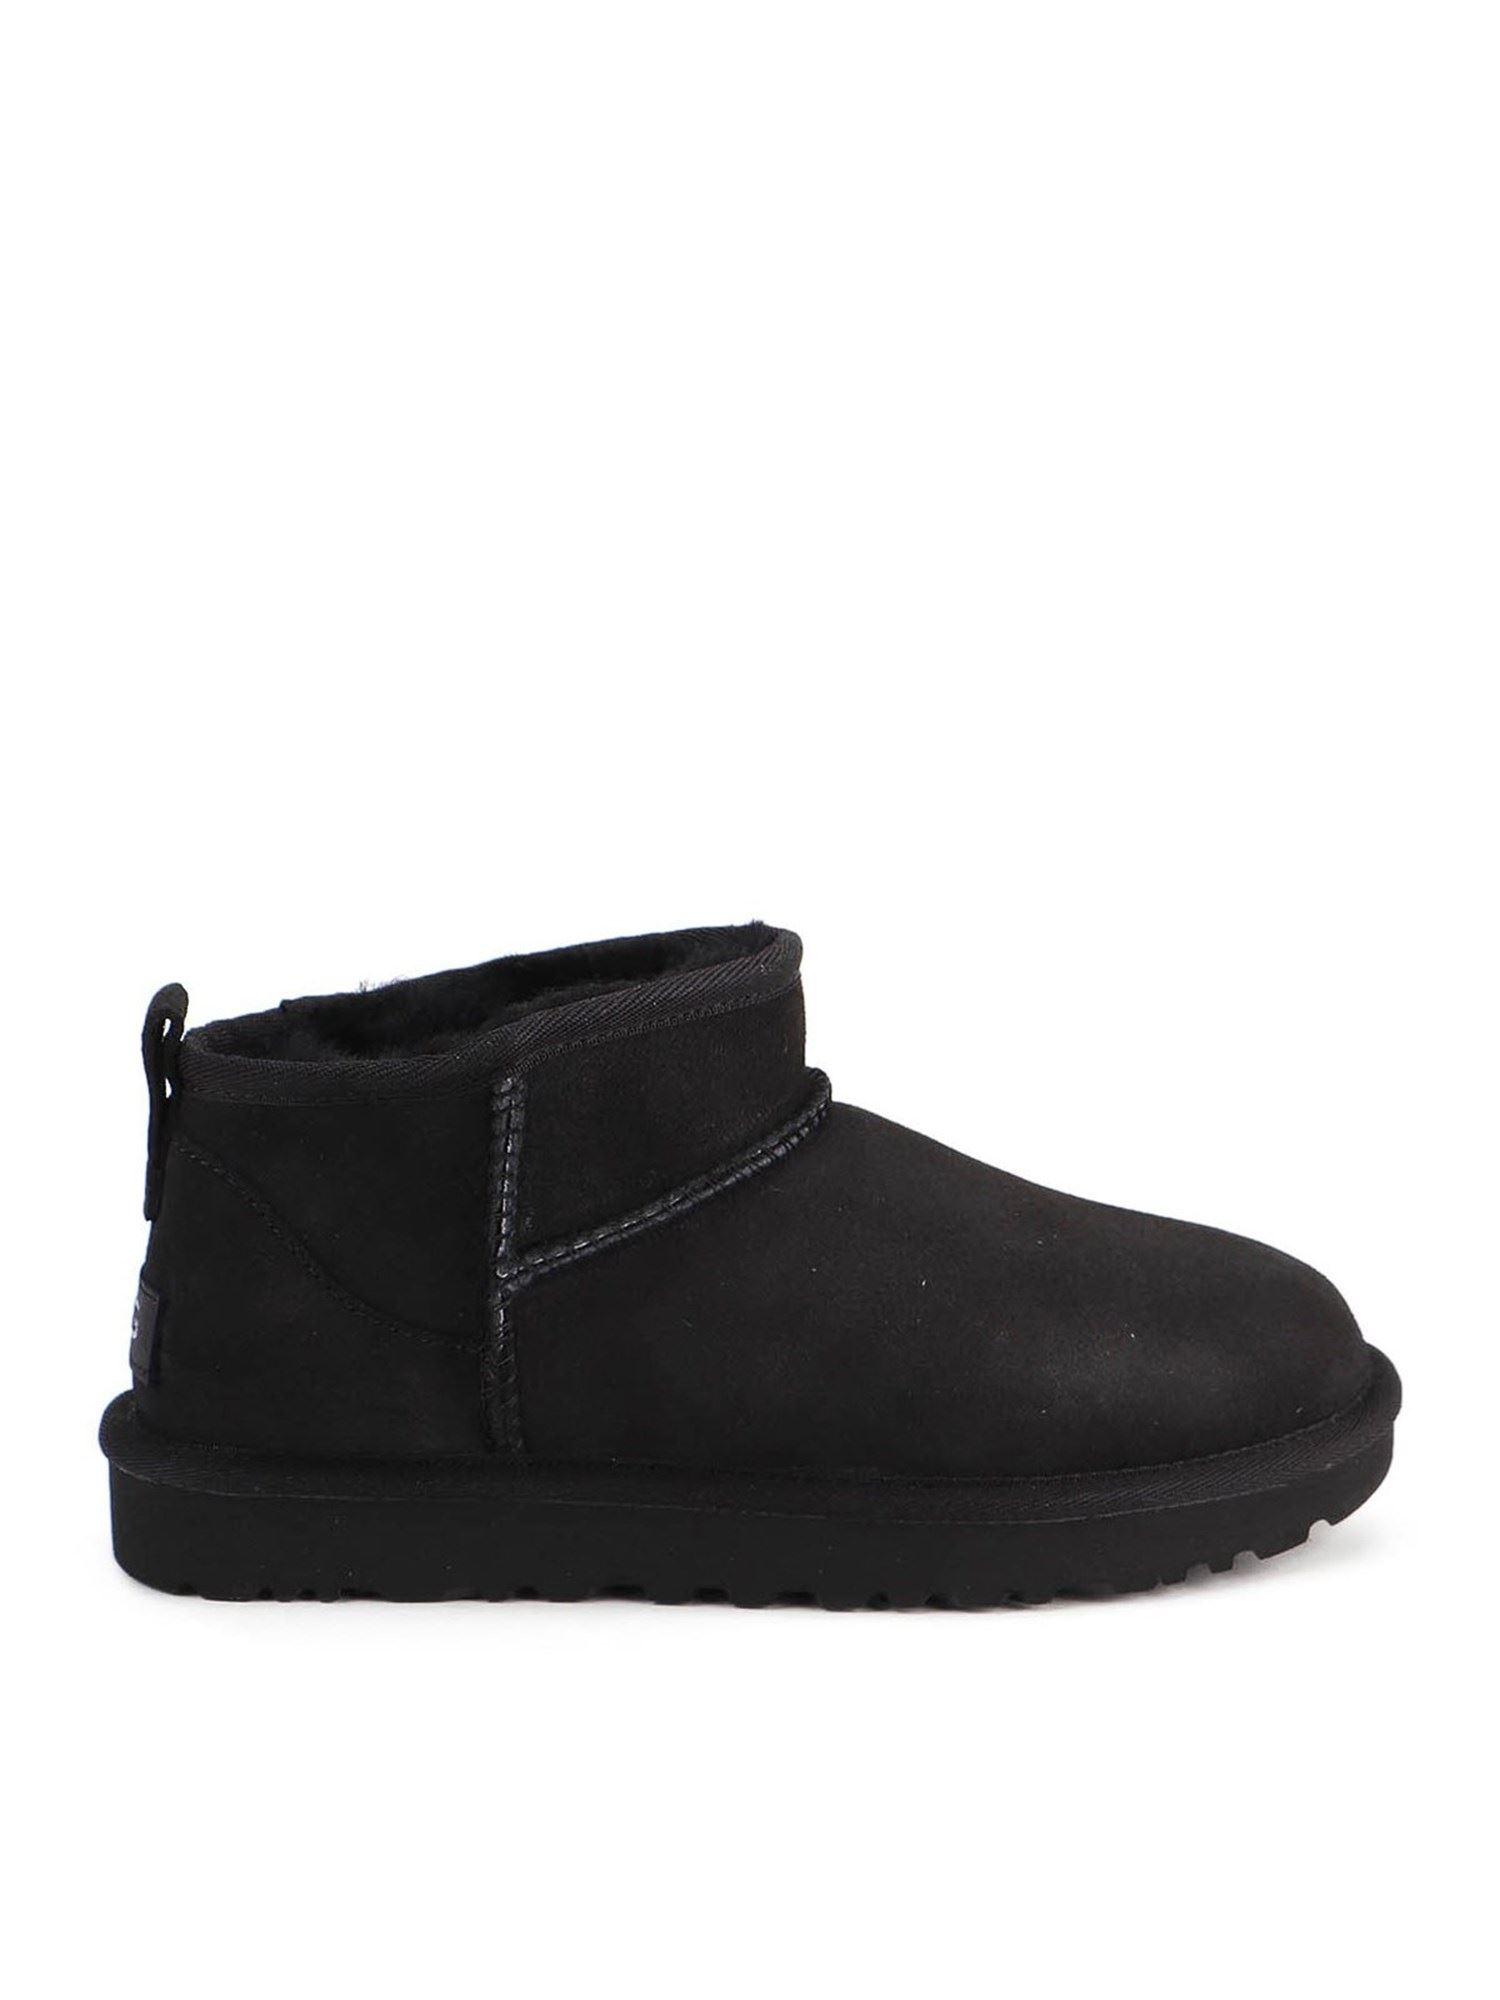 UGG Classic Ultra Mini Ankle Boots in Black - Lyst